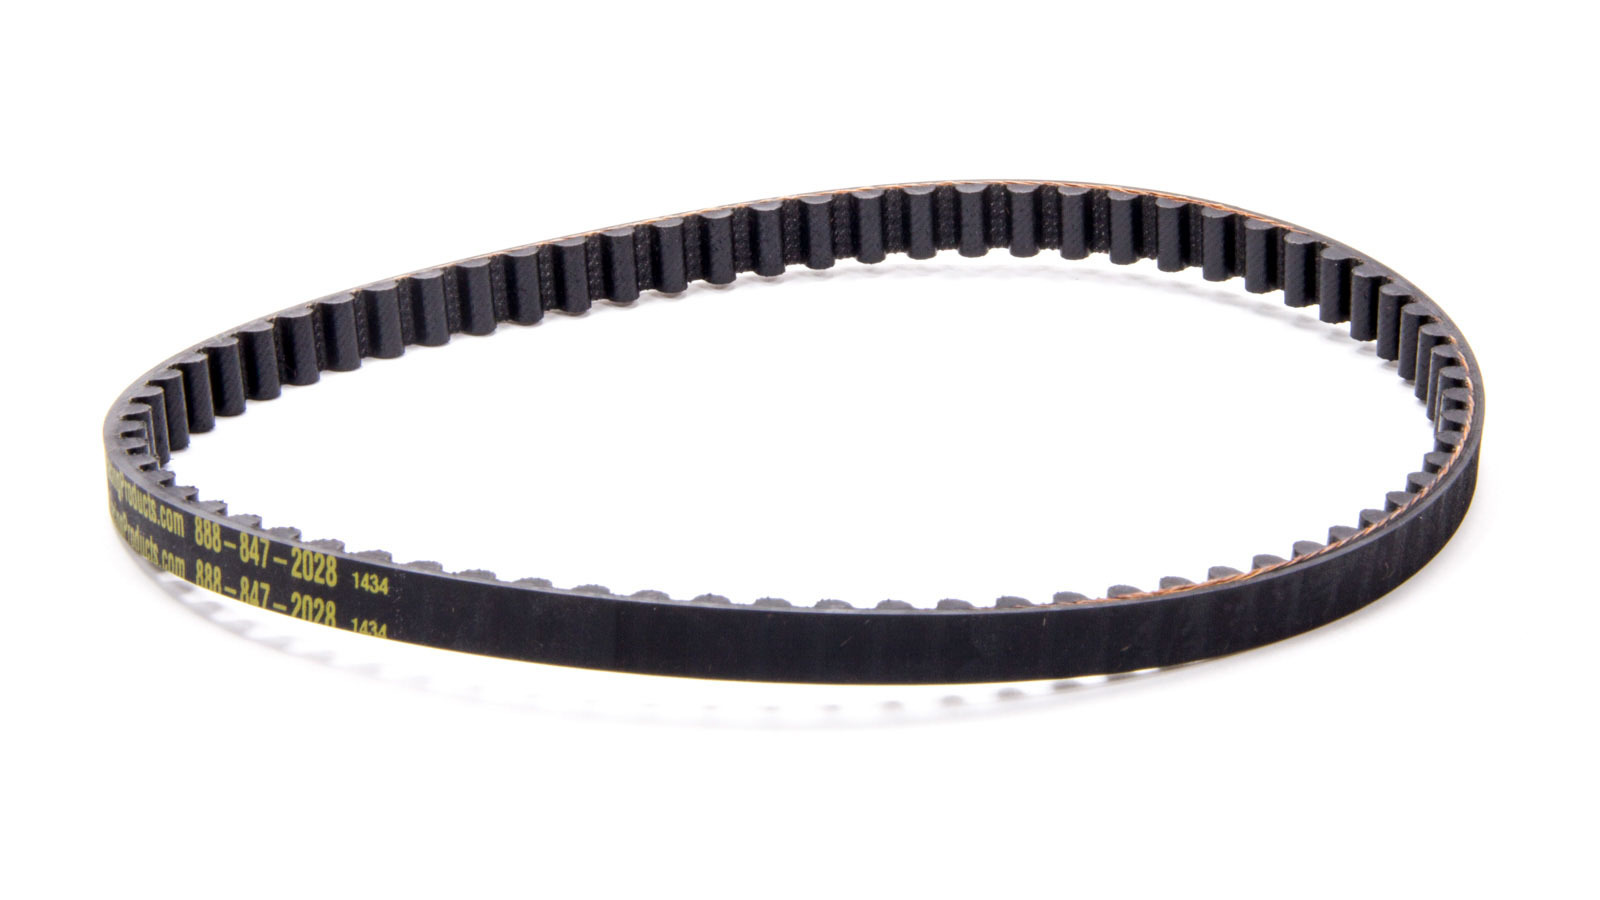 Jones Racing Products 600-10HD HTD Drive Belt, 23.620 in Long, 10 mm Wide, 8 mm Pitch, Each